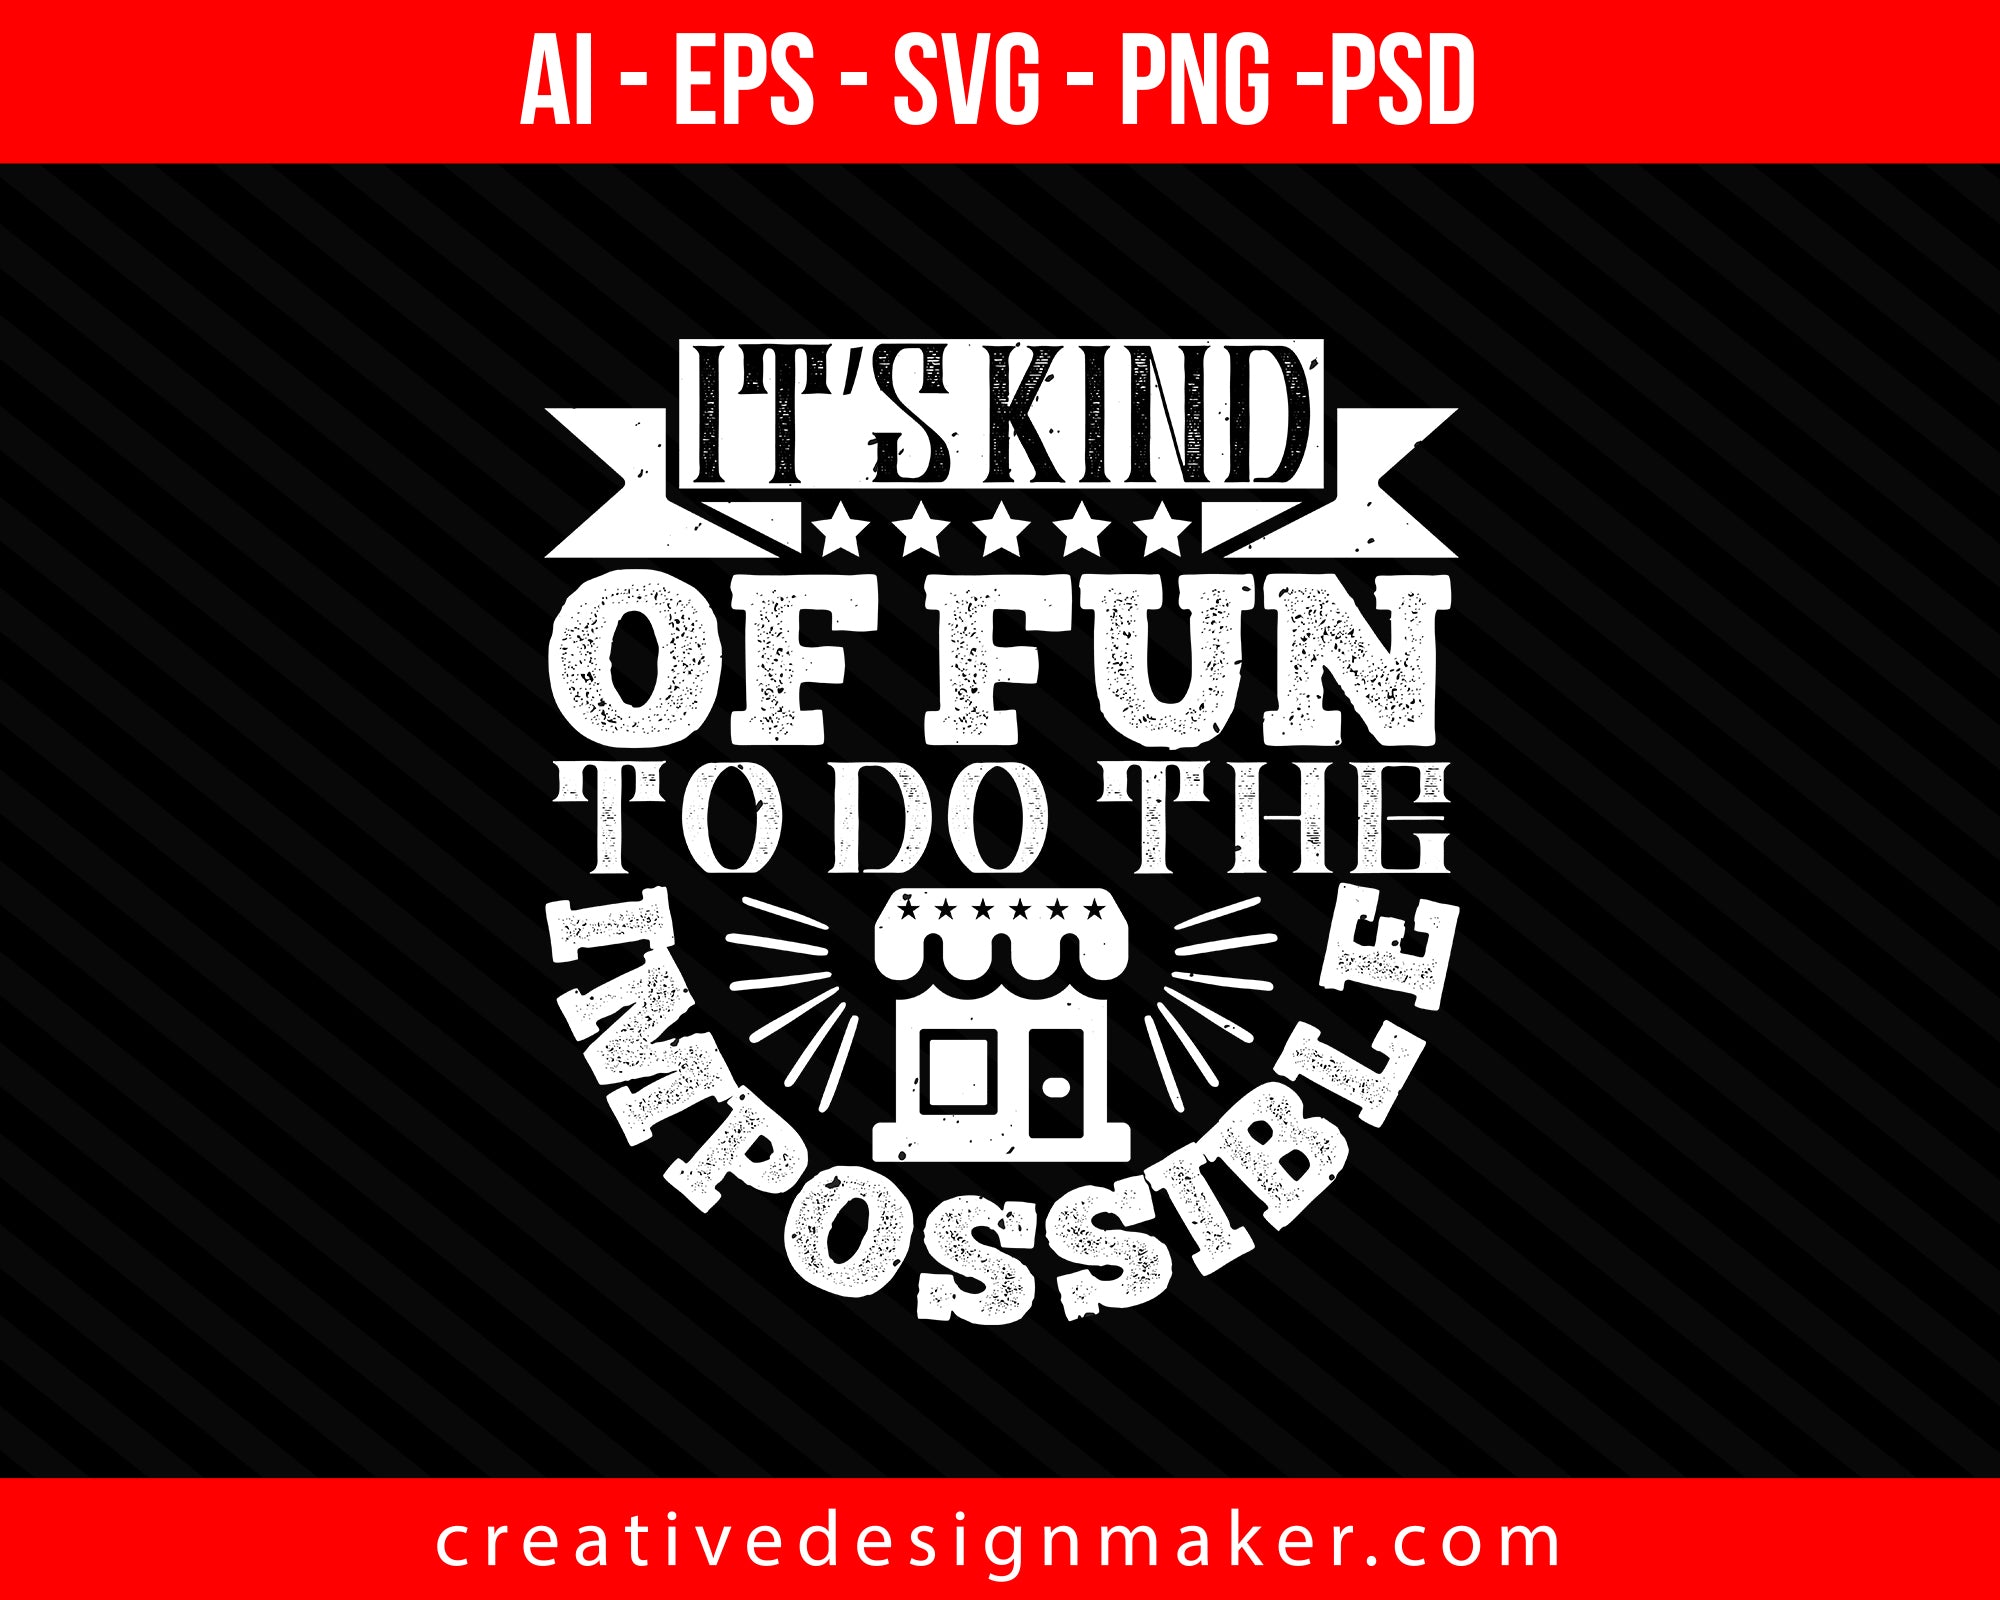 It’s kind of fun to do the impossible Architect Print Ready Editable T-Shirt SVG Design!